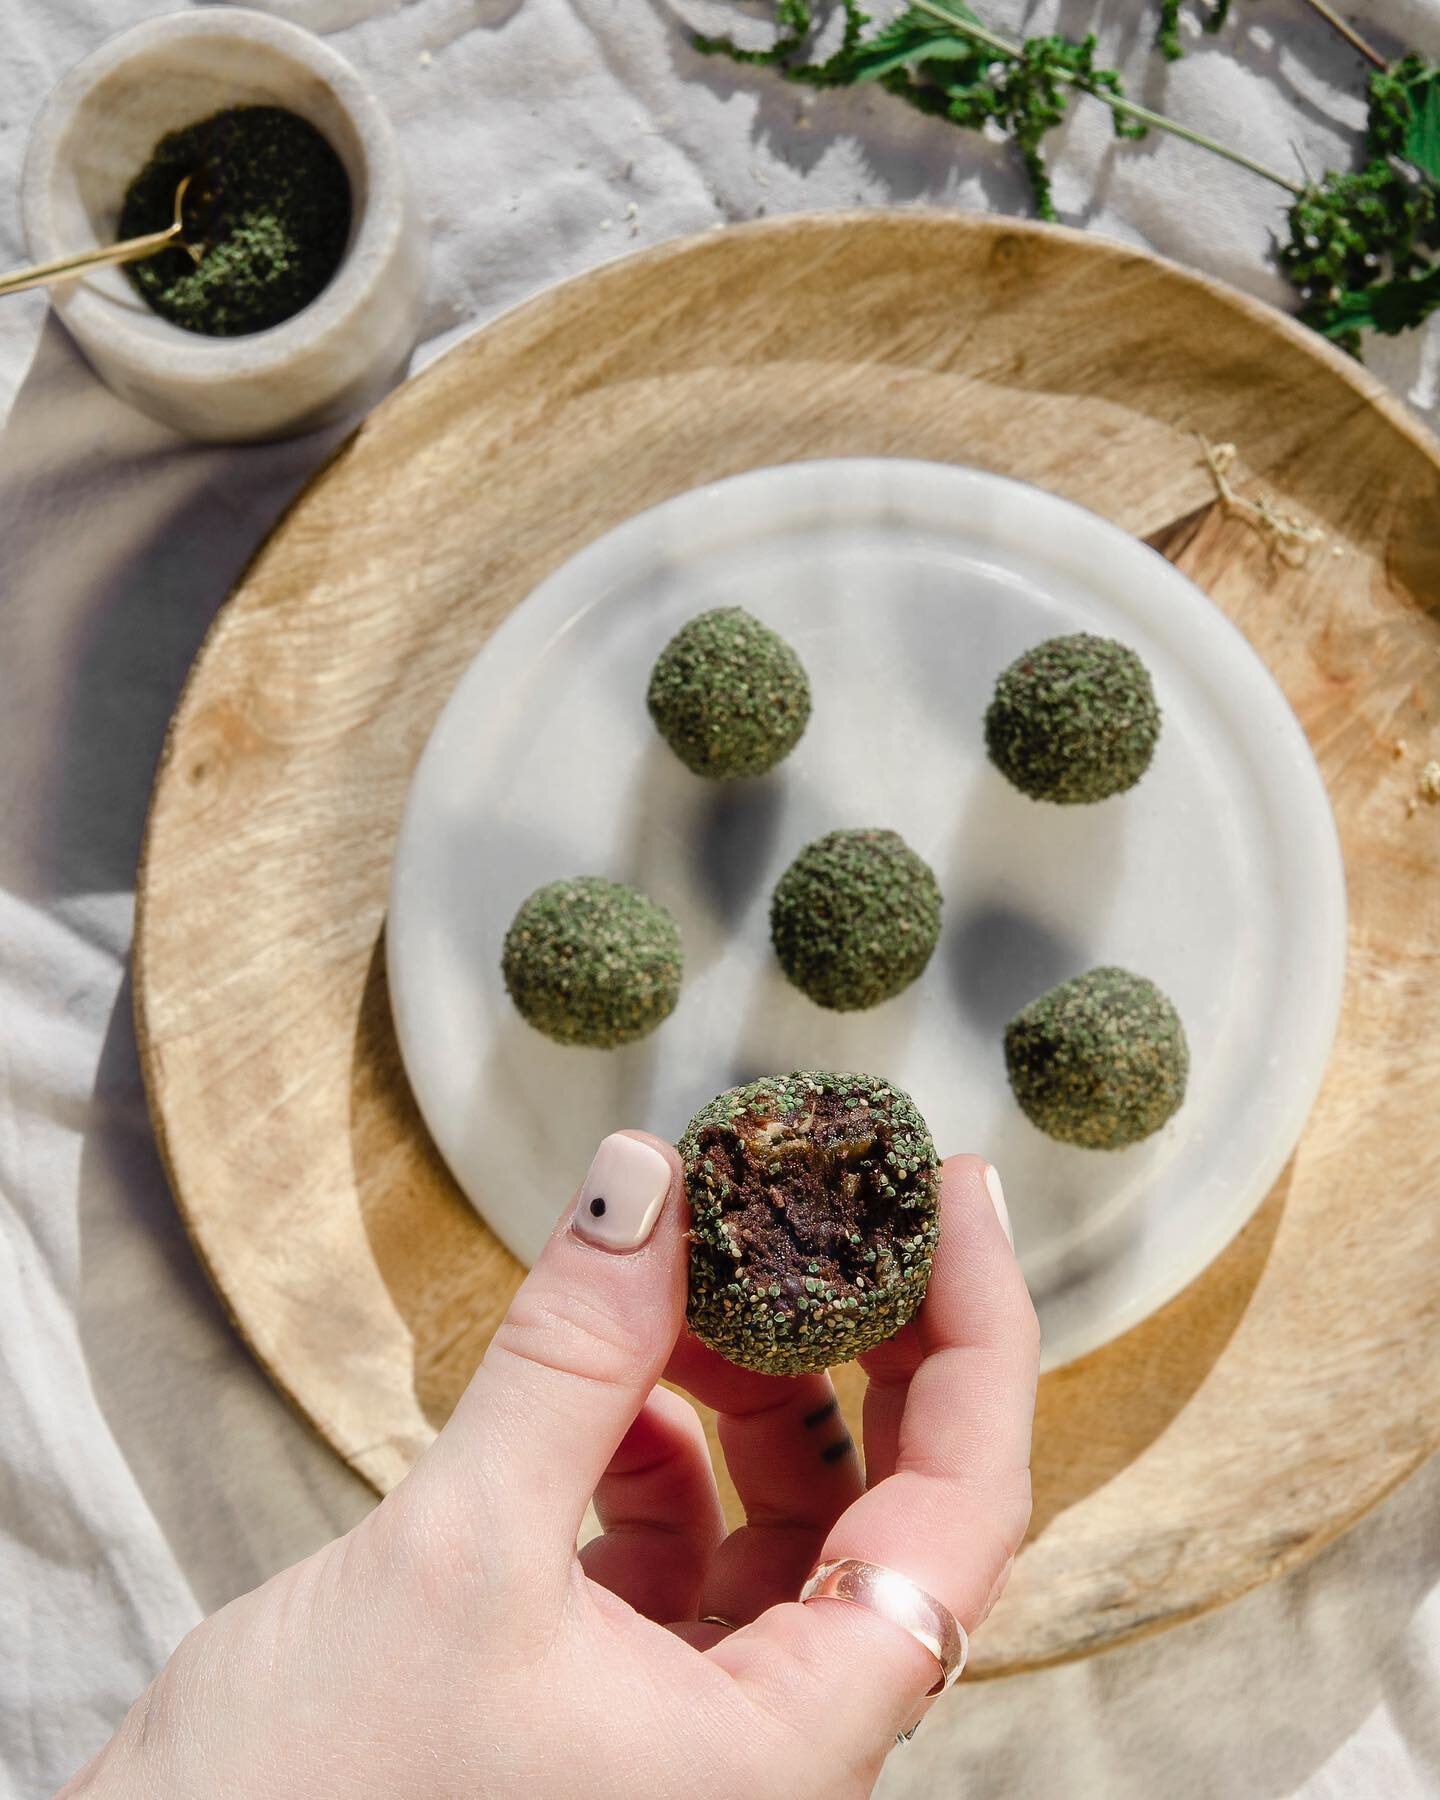 〰️Nettle Seed Truffles〰️
⠀⠀⠀⠀⠀⠀⠀⠀⠀
These little raw bombs of flavour are a really simple way to incorporate nutrient dense wild foods into your treats.
⠀⠀⠀⠀⠀⠀⠀⠀⠀
Nettle seeds are rich in fatty acids, silica and vitamins A &amp; C to name a few.
⠀⠀⠀⠀⠀